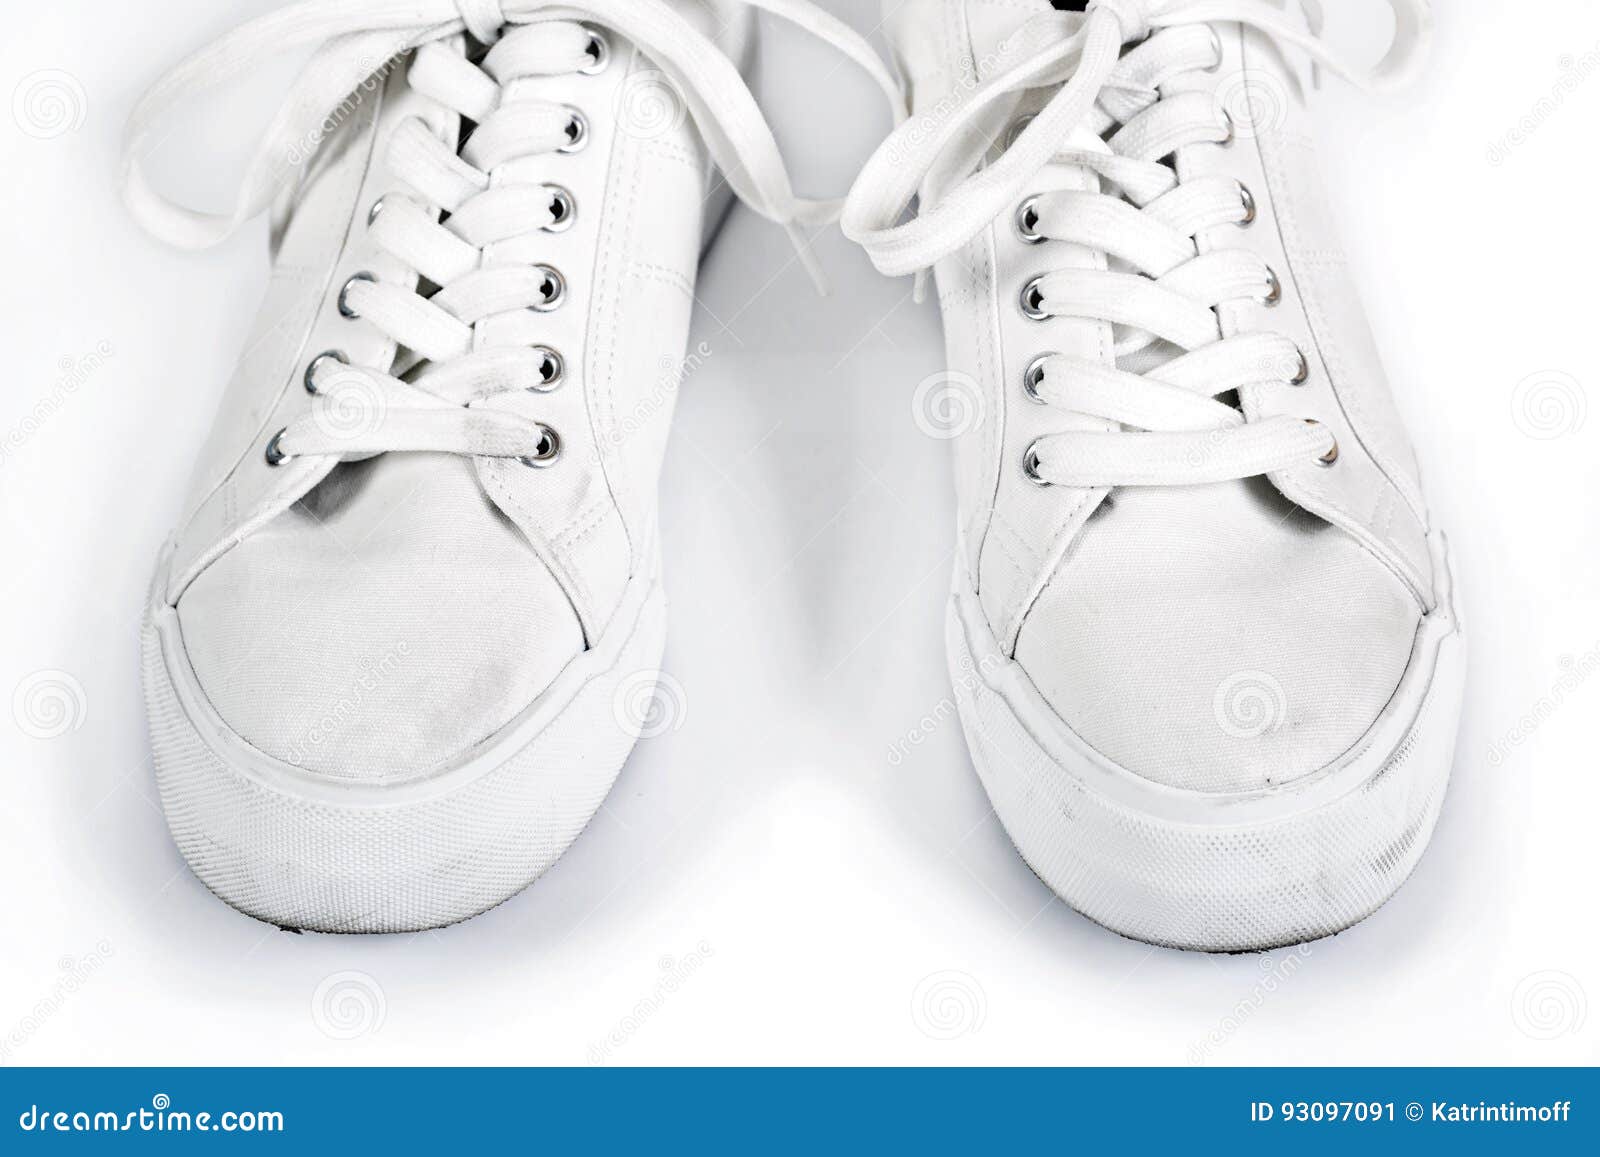 Pair of White Sneakers with Laces Stock Image - Image of feet, sport ...